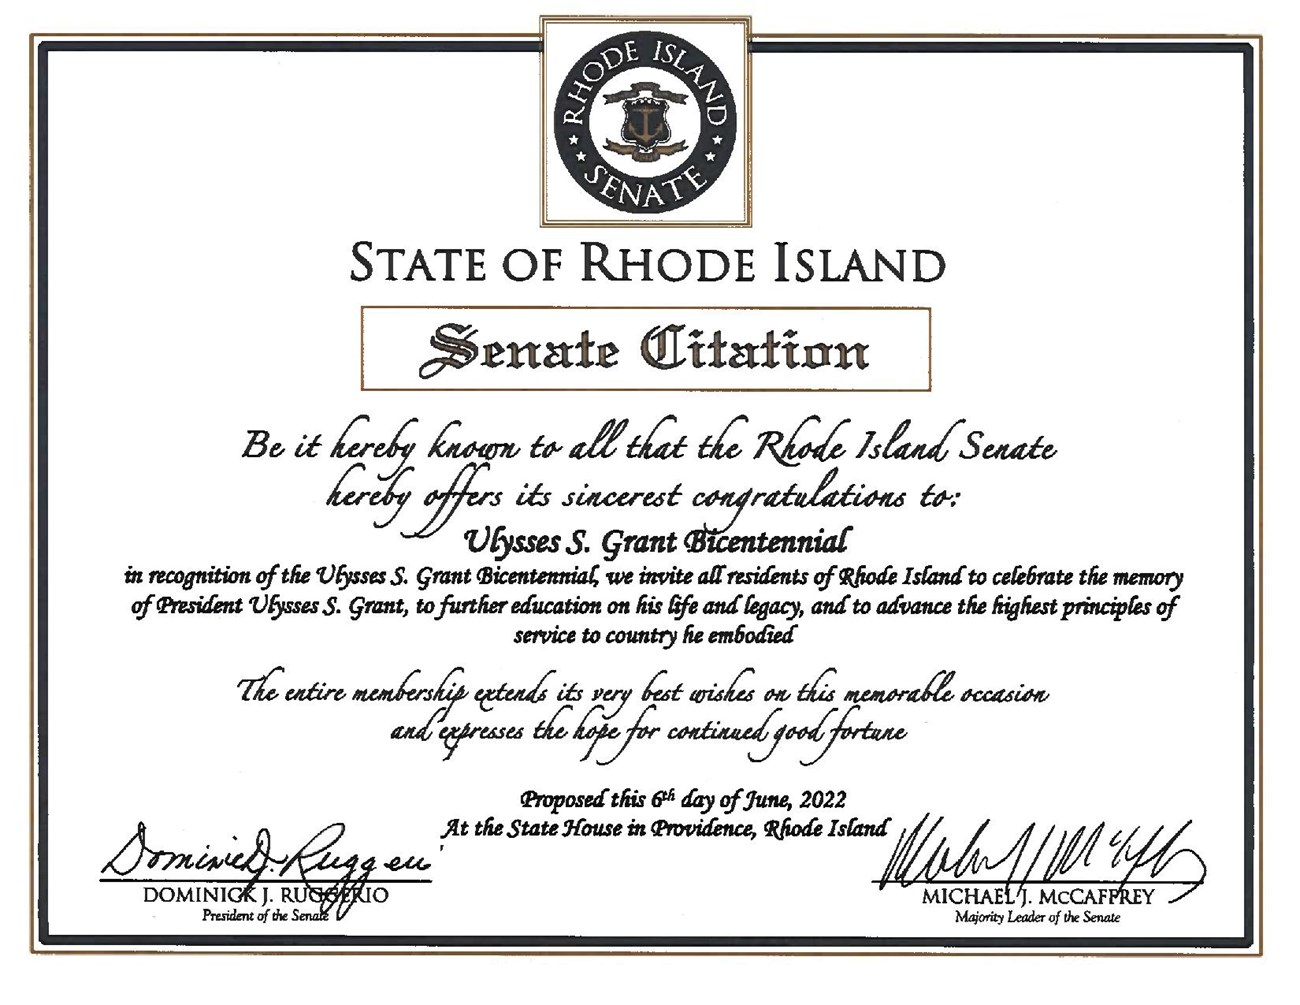 Message from Rhode Island honoring the 200th anniversary of Ulysses S Grant's birthday. Seal of Rhode Island is centered at the top of the page.